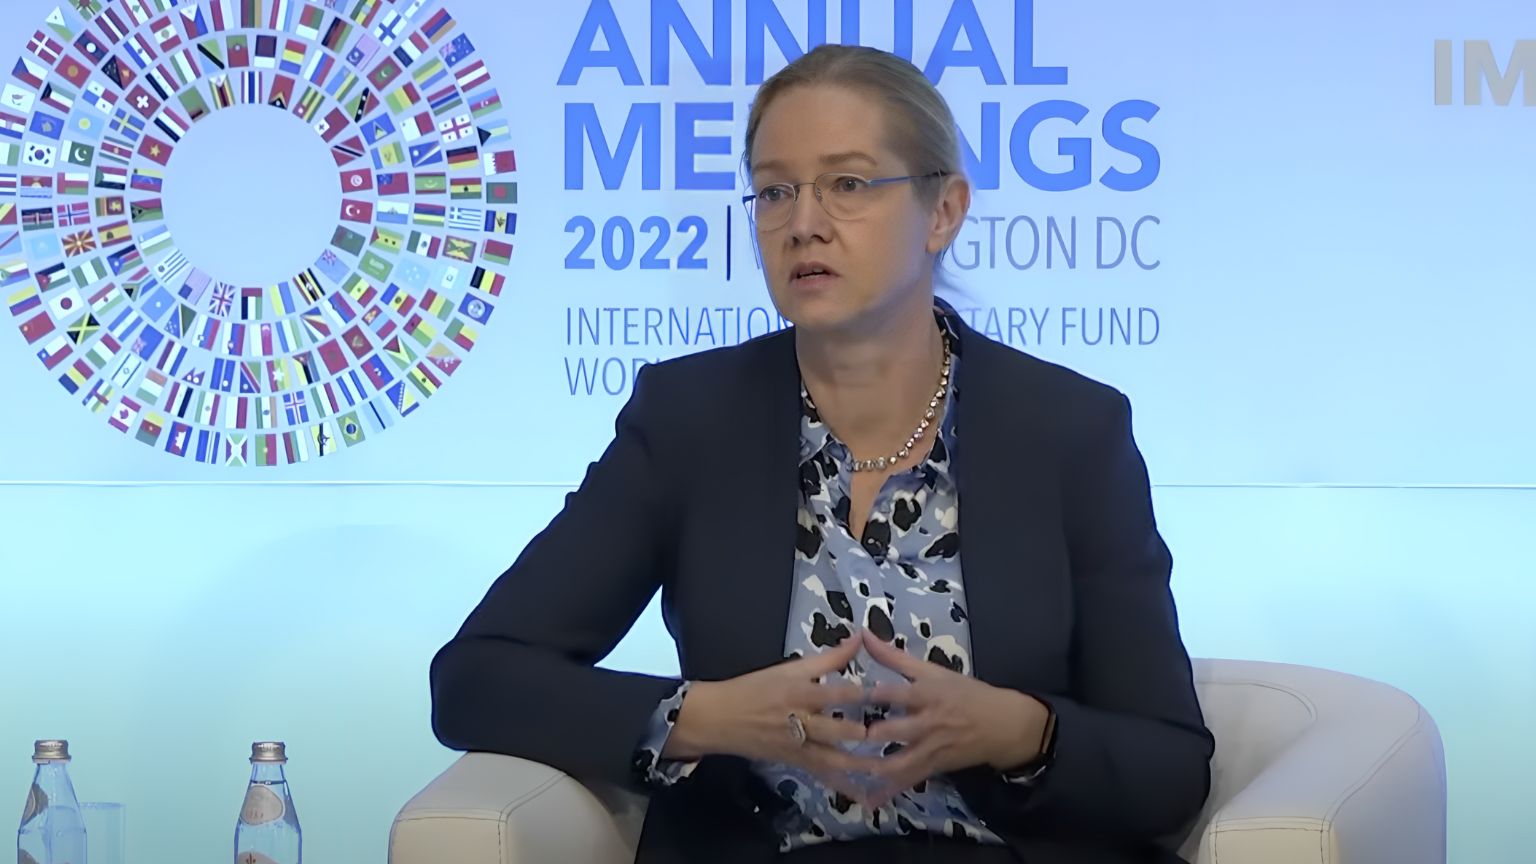 IMF meeting: CBDC should be tied to digital IDs to “push society into to new equilibriums”